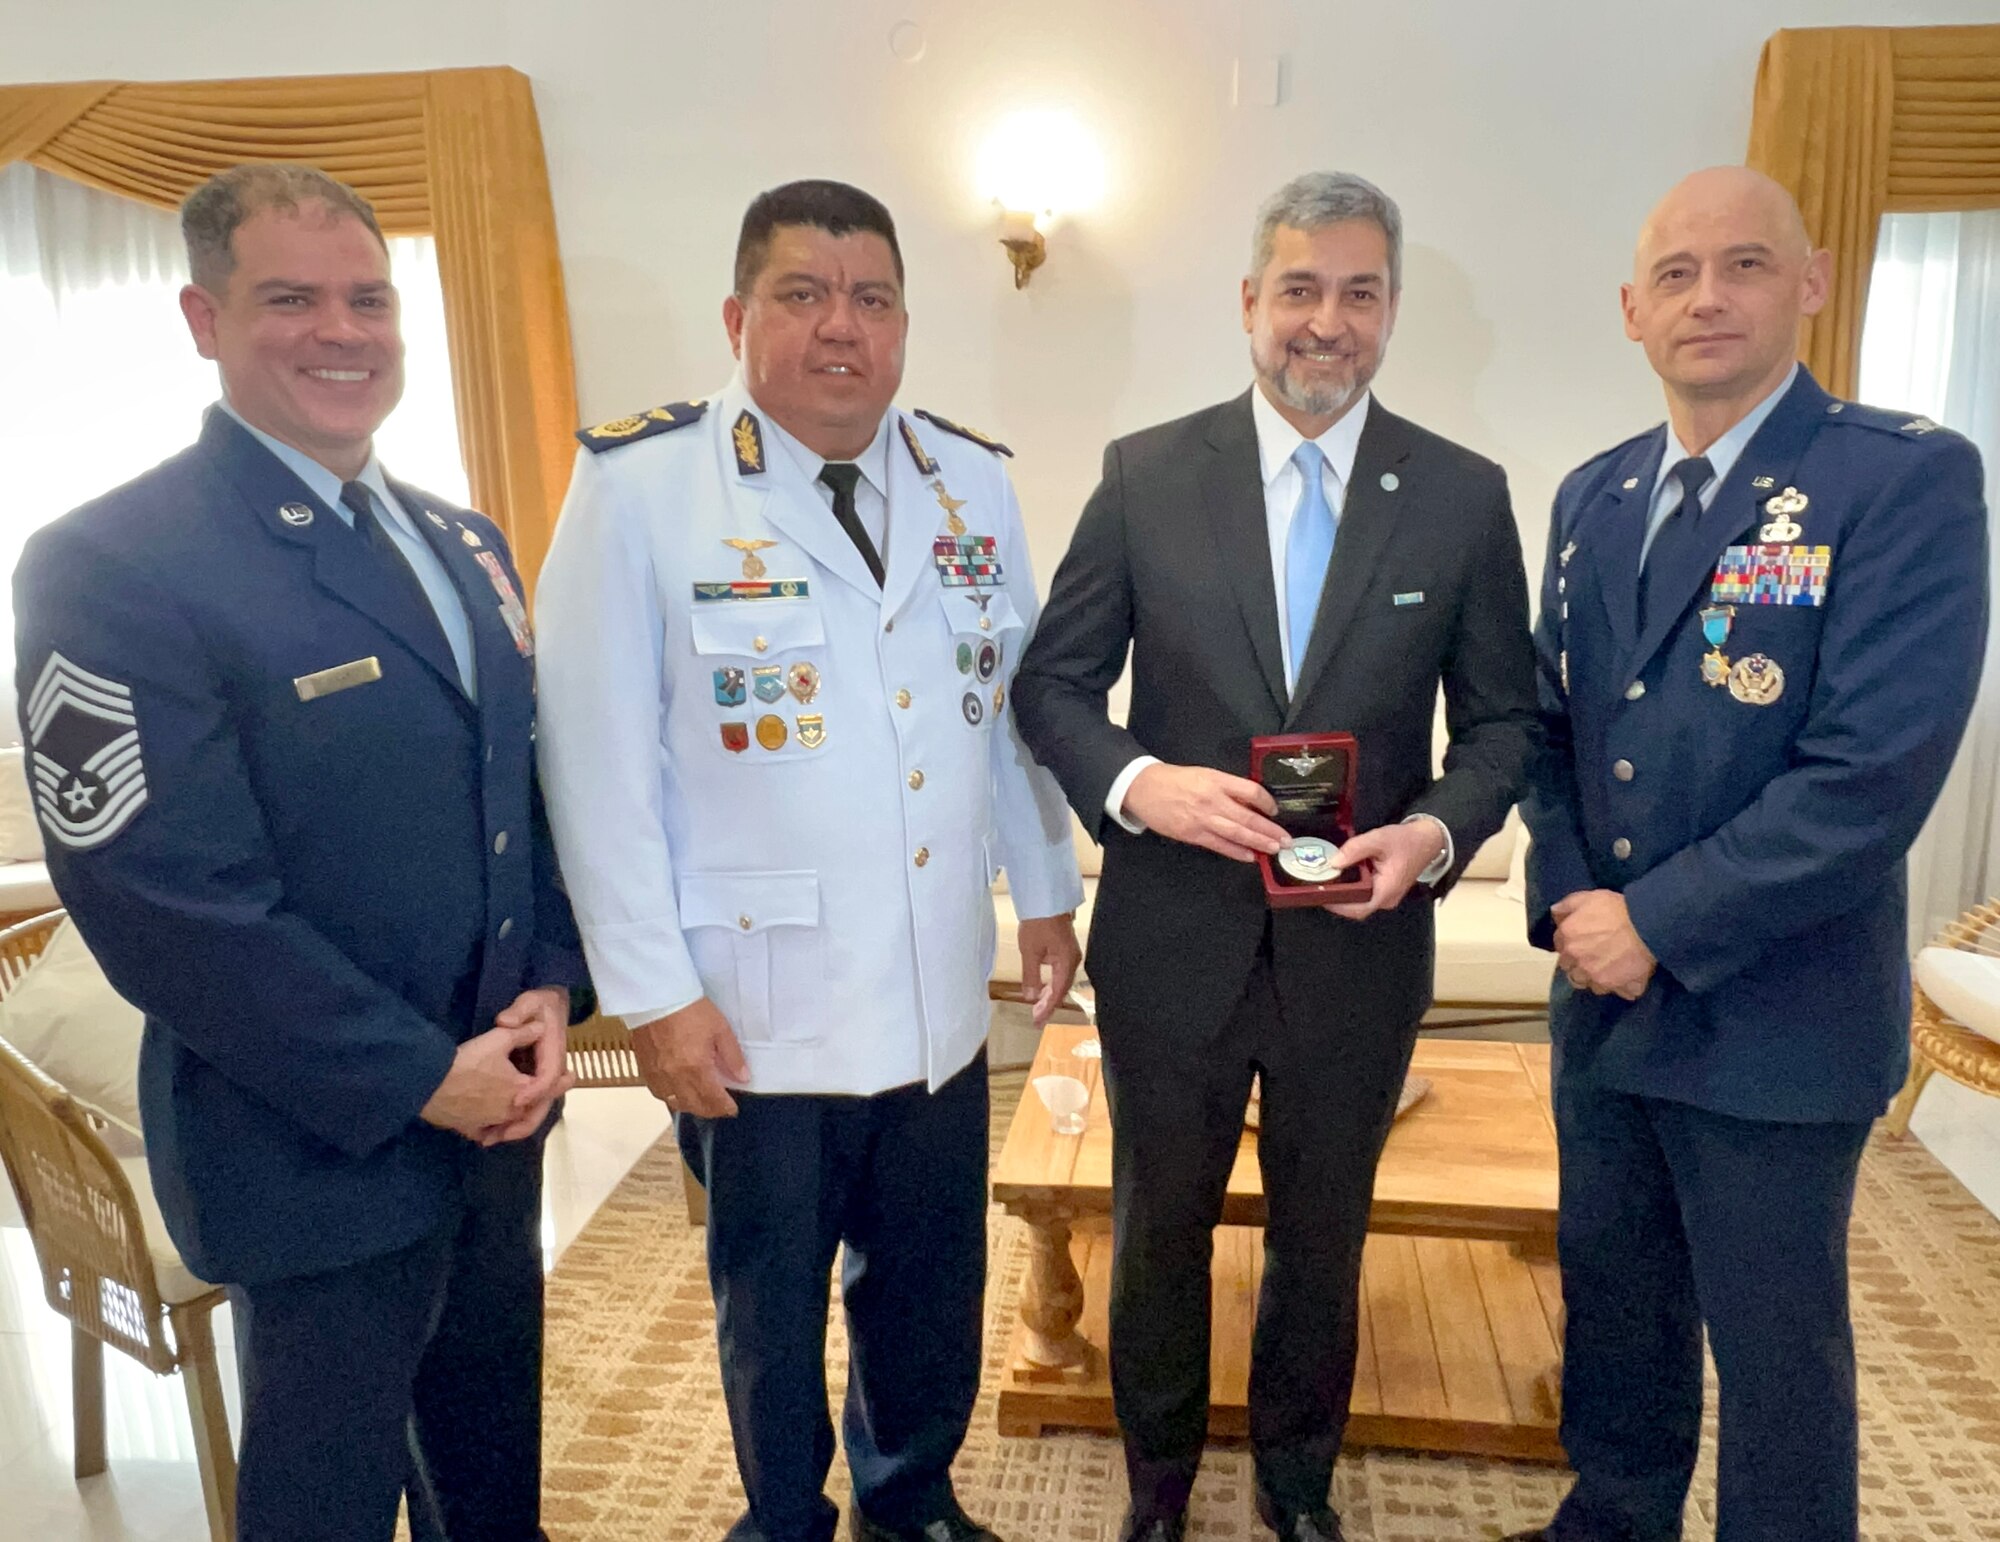 Mario Abdo Benitez, President of Paraguay, holds a token from the Inter-American Air Forces Academy. President Benitez is flanked by Chief Master Sgt. Yusef Saad, IAAFA Senior Enlisted Leader, Gen. Arturo González Ocampo, Commander of the Paraguayan Air Force, and Col. José Jiménez, Jr., IAAFA commandant, in Asunción, Paraguay, Feb. 22, 2023. The senior leaders attended the Paraguayan Air Force’s Centennial Anniversary in Asunción, Paraguay. (Courtesy photo)